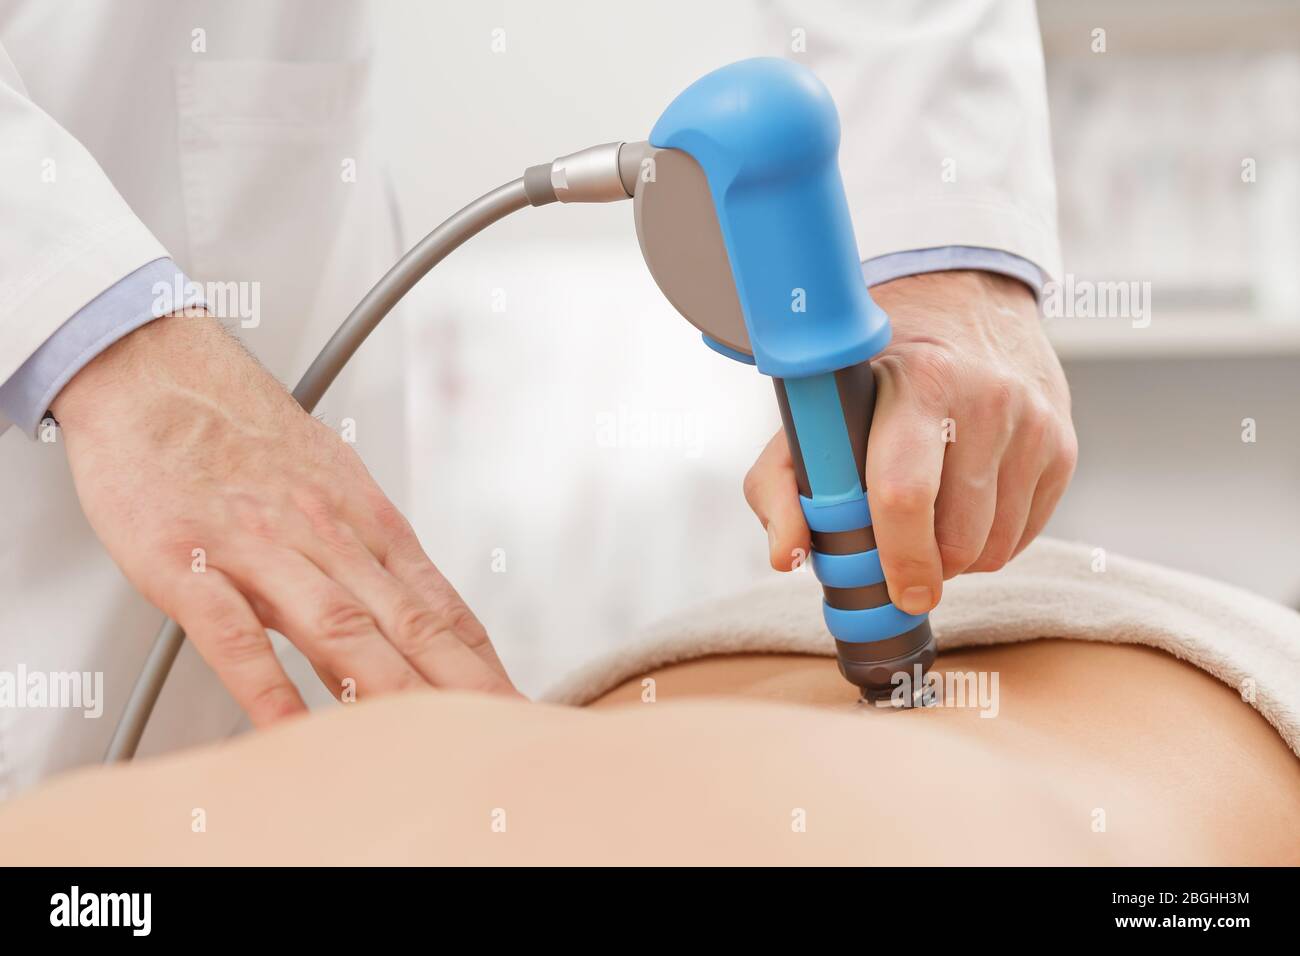 https://c8.alamy.com/comp/2BGHH3M/extracorporeal-shockwave-therapy-eswteffective-non-surgical-treatmentphysical-therapy-for-lower-back-with-shock-wavespain-relief-normalization-and-2BGHH3M.jpg